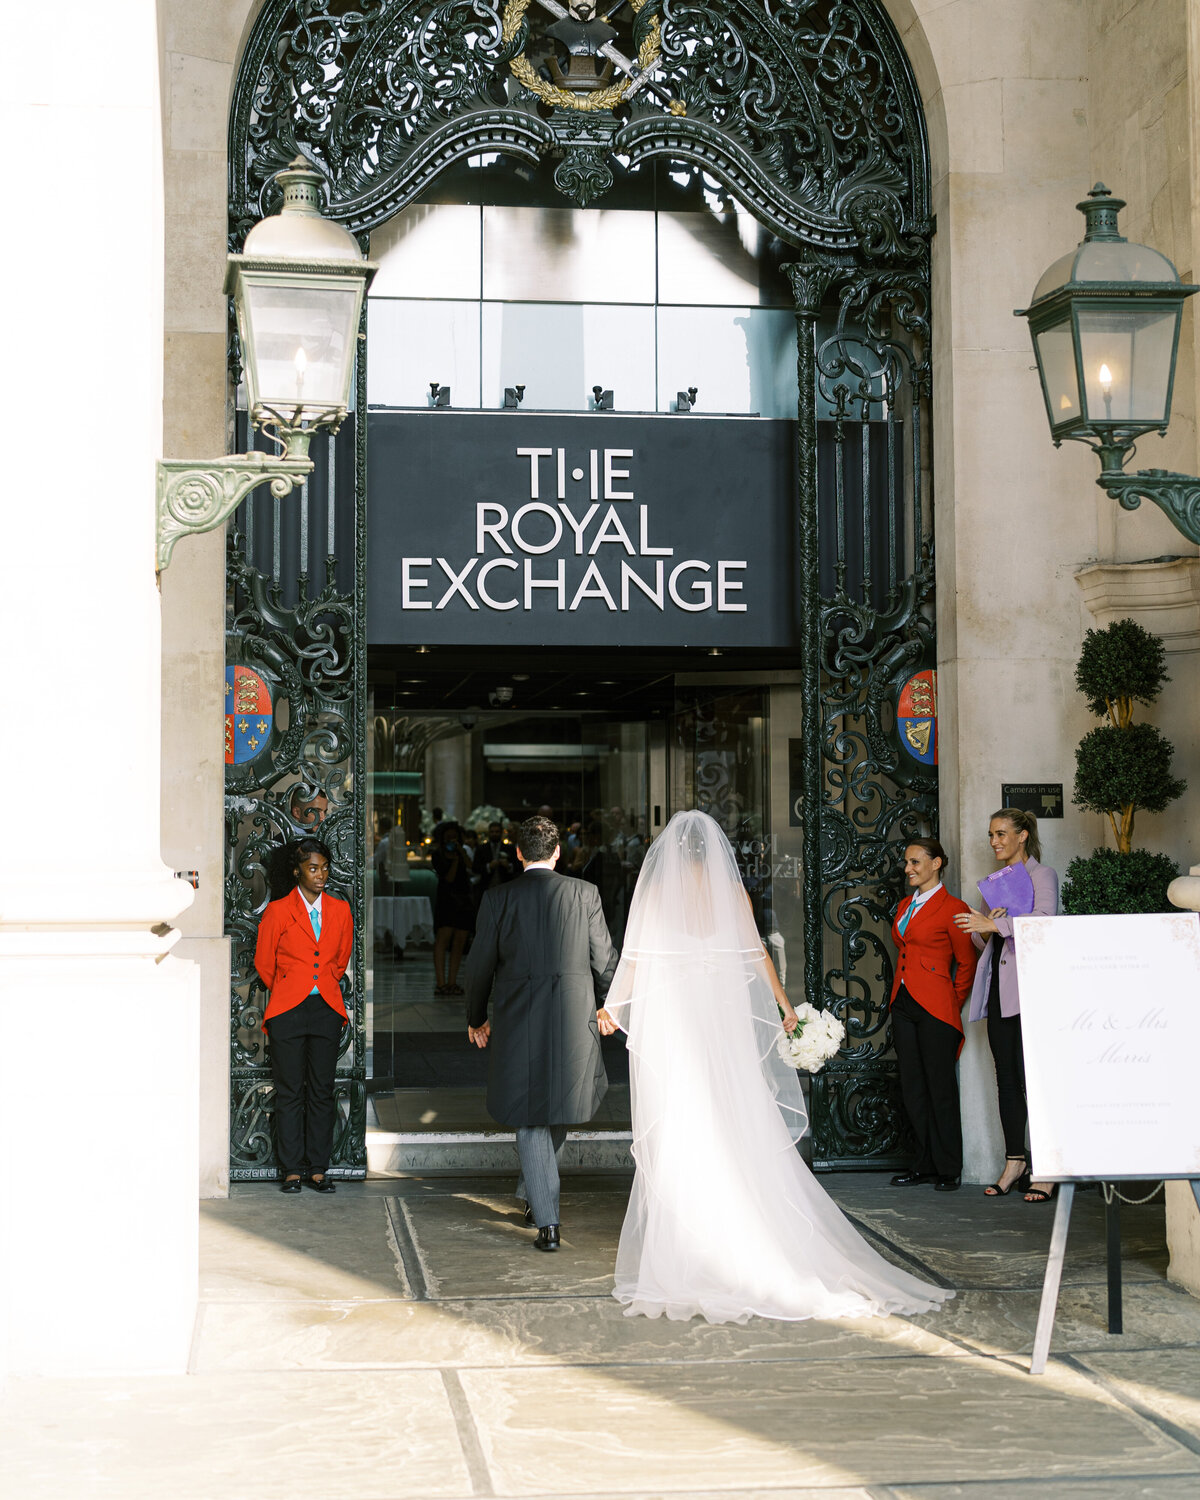 Bride and groom arriving for wedding reception at the Royal Exchange wedding venue